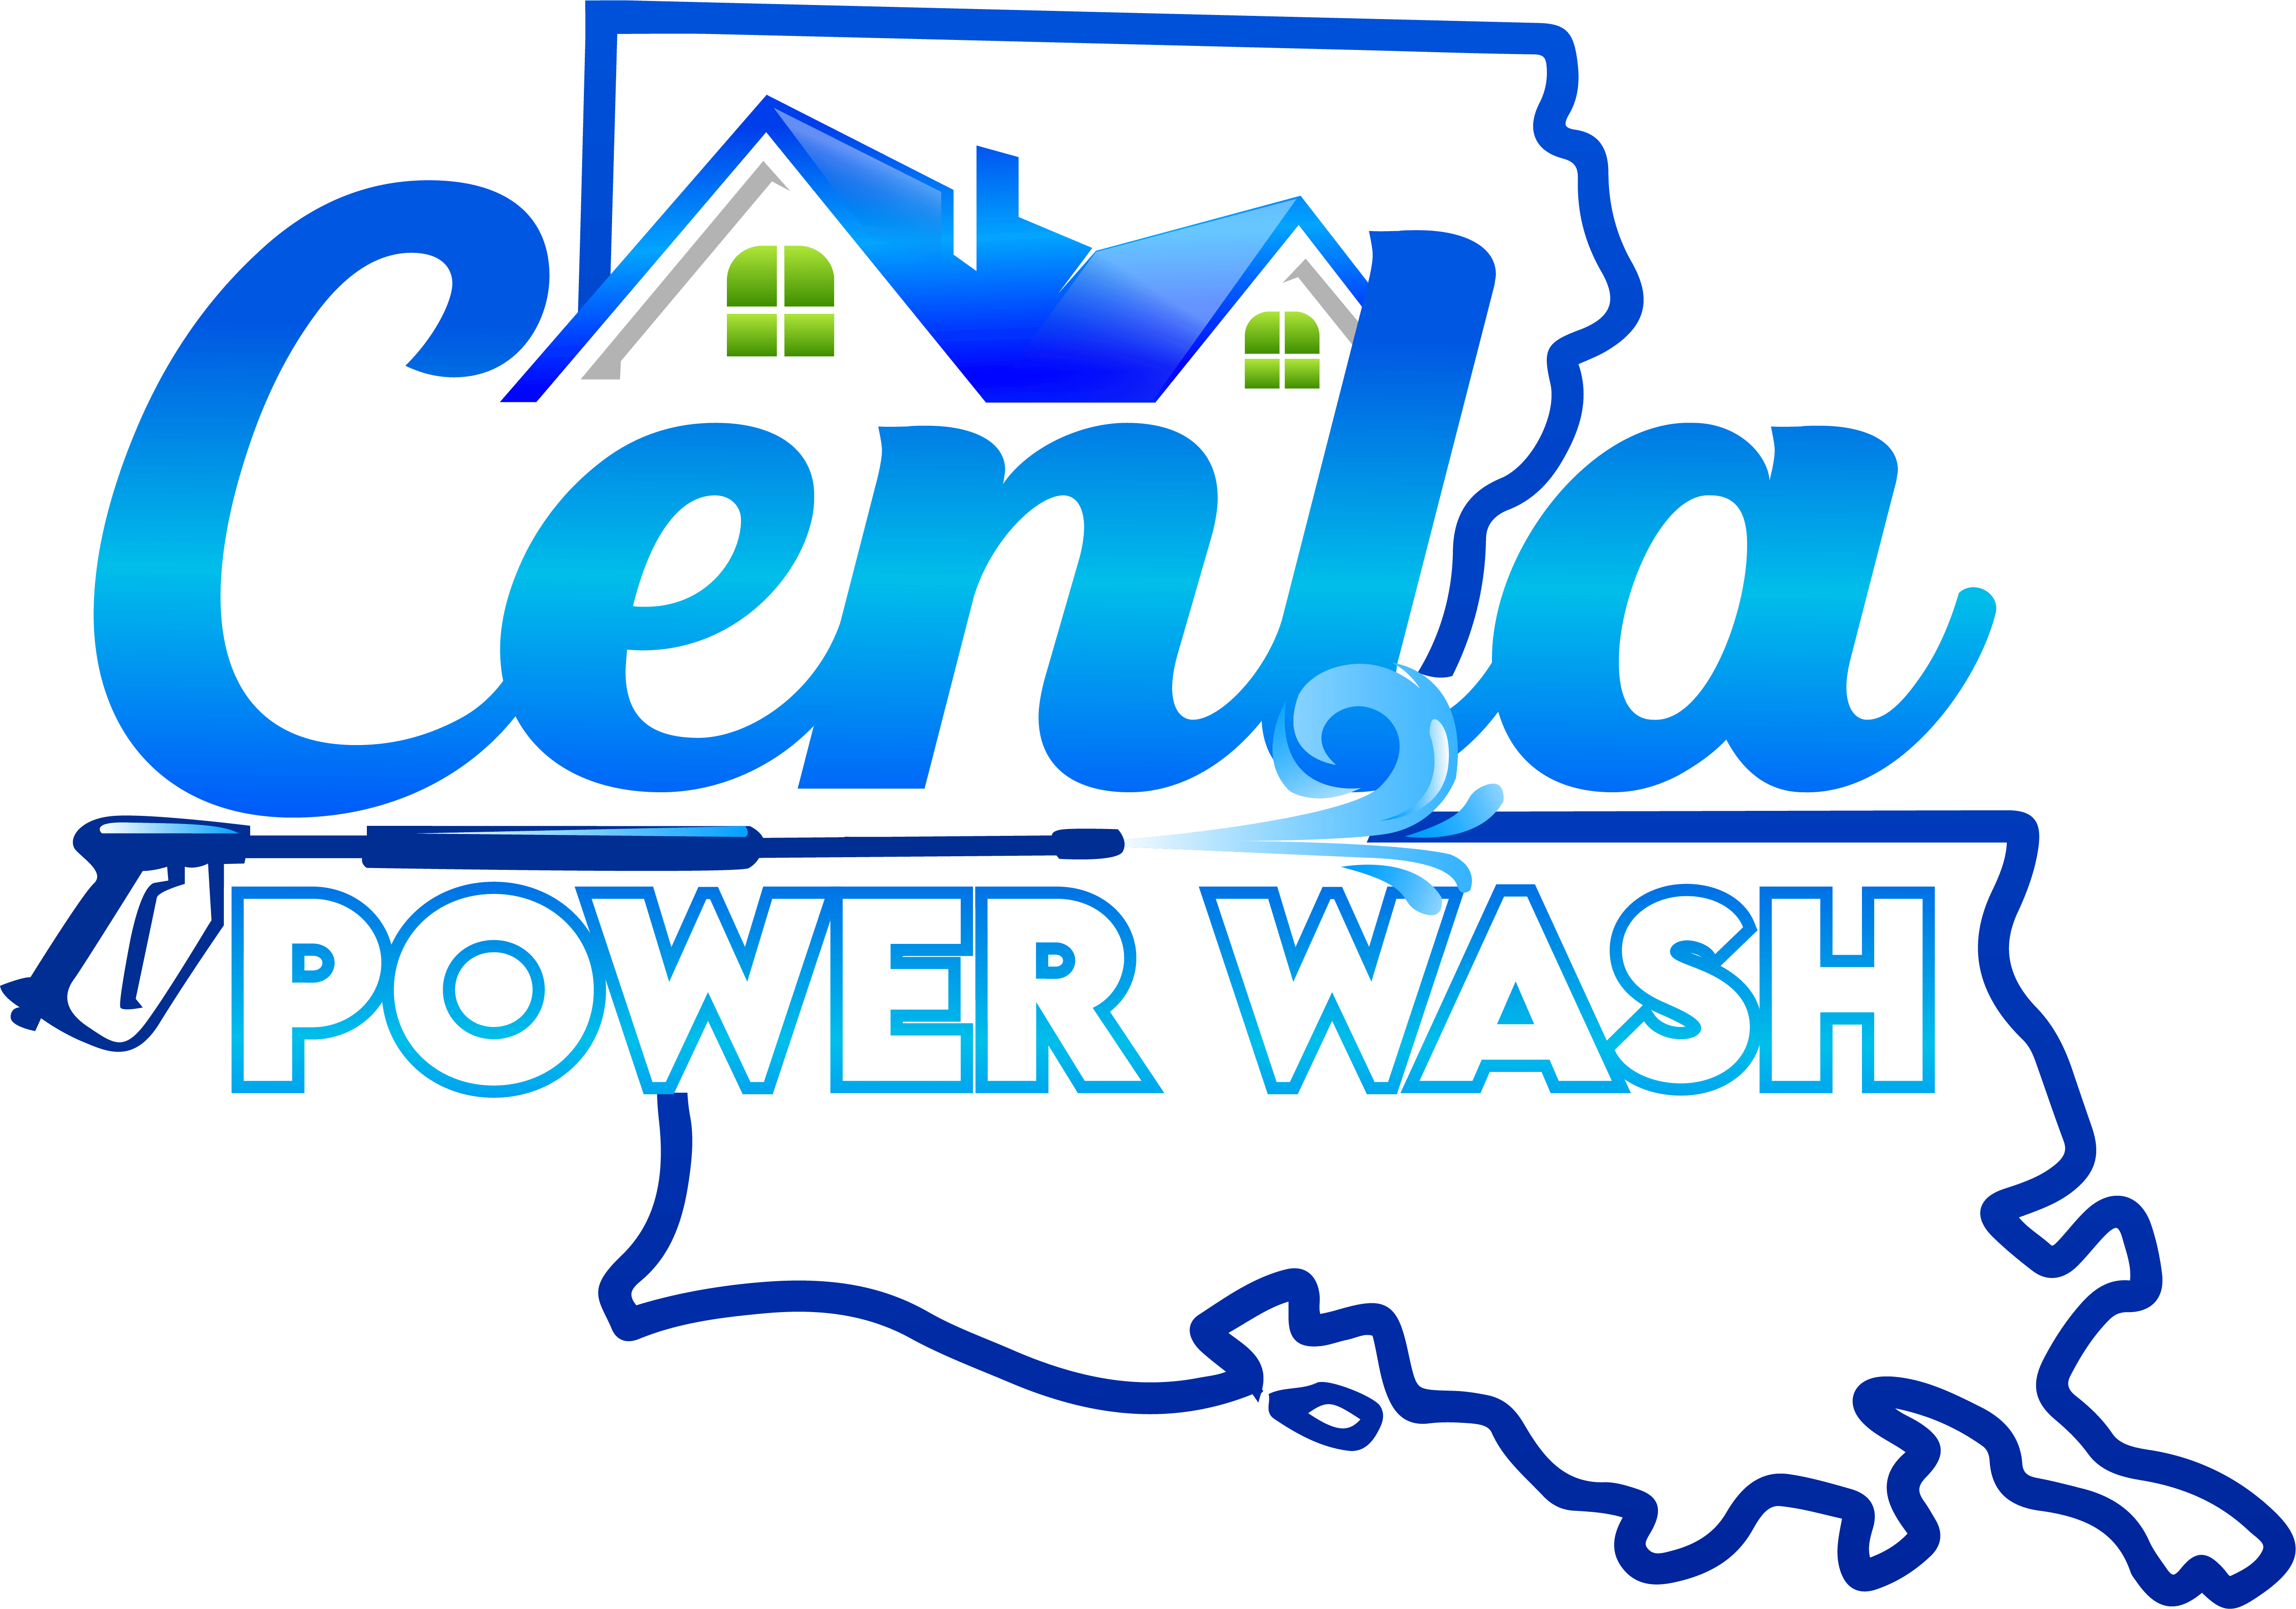 Cenla Power Wash Pressure Washing and House Washing Company in Central Louisiana